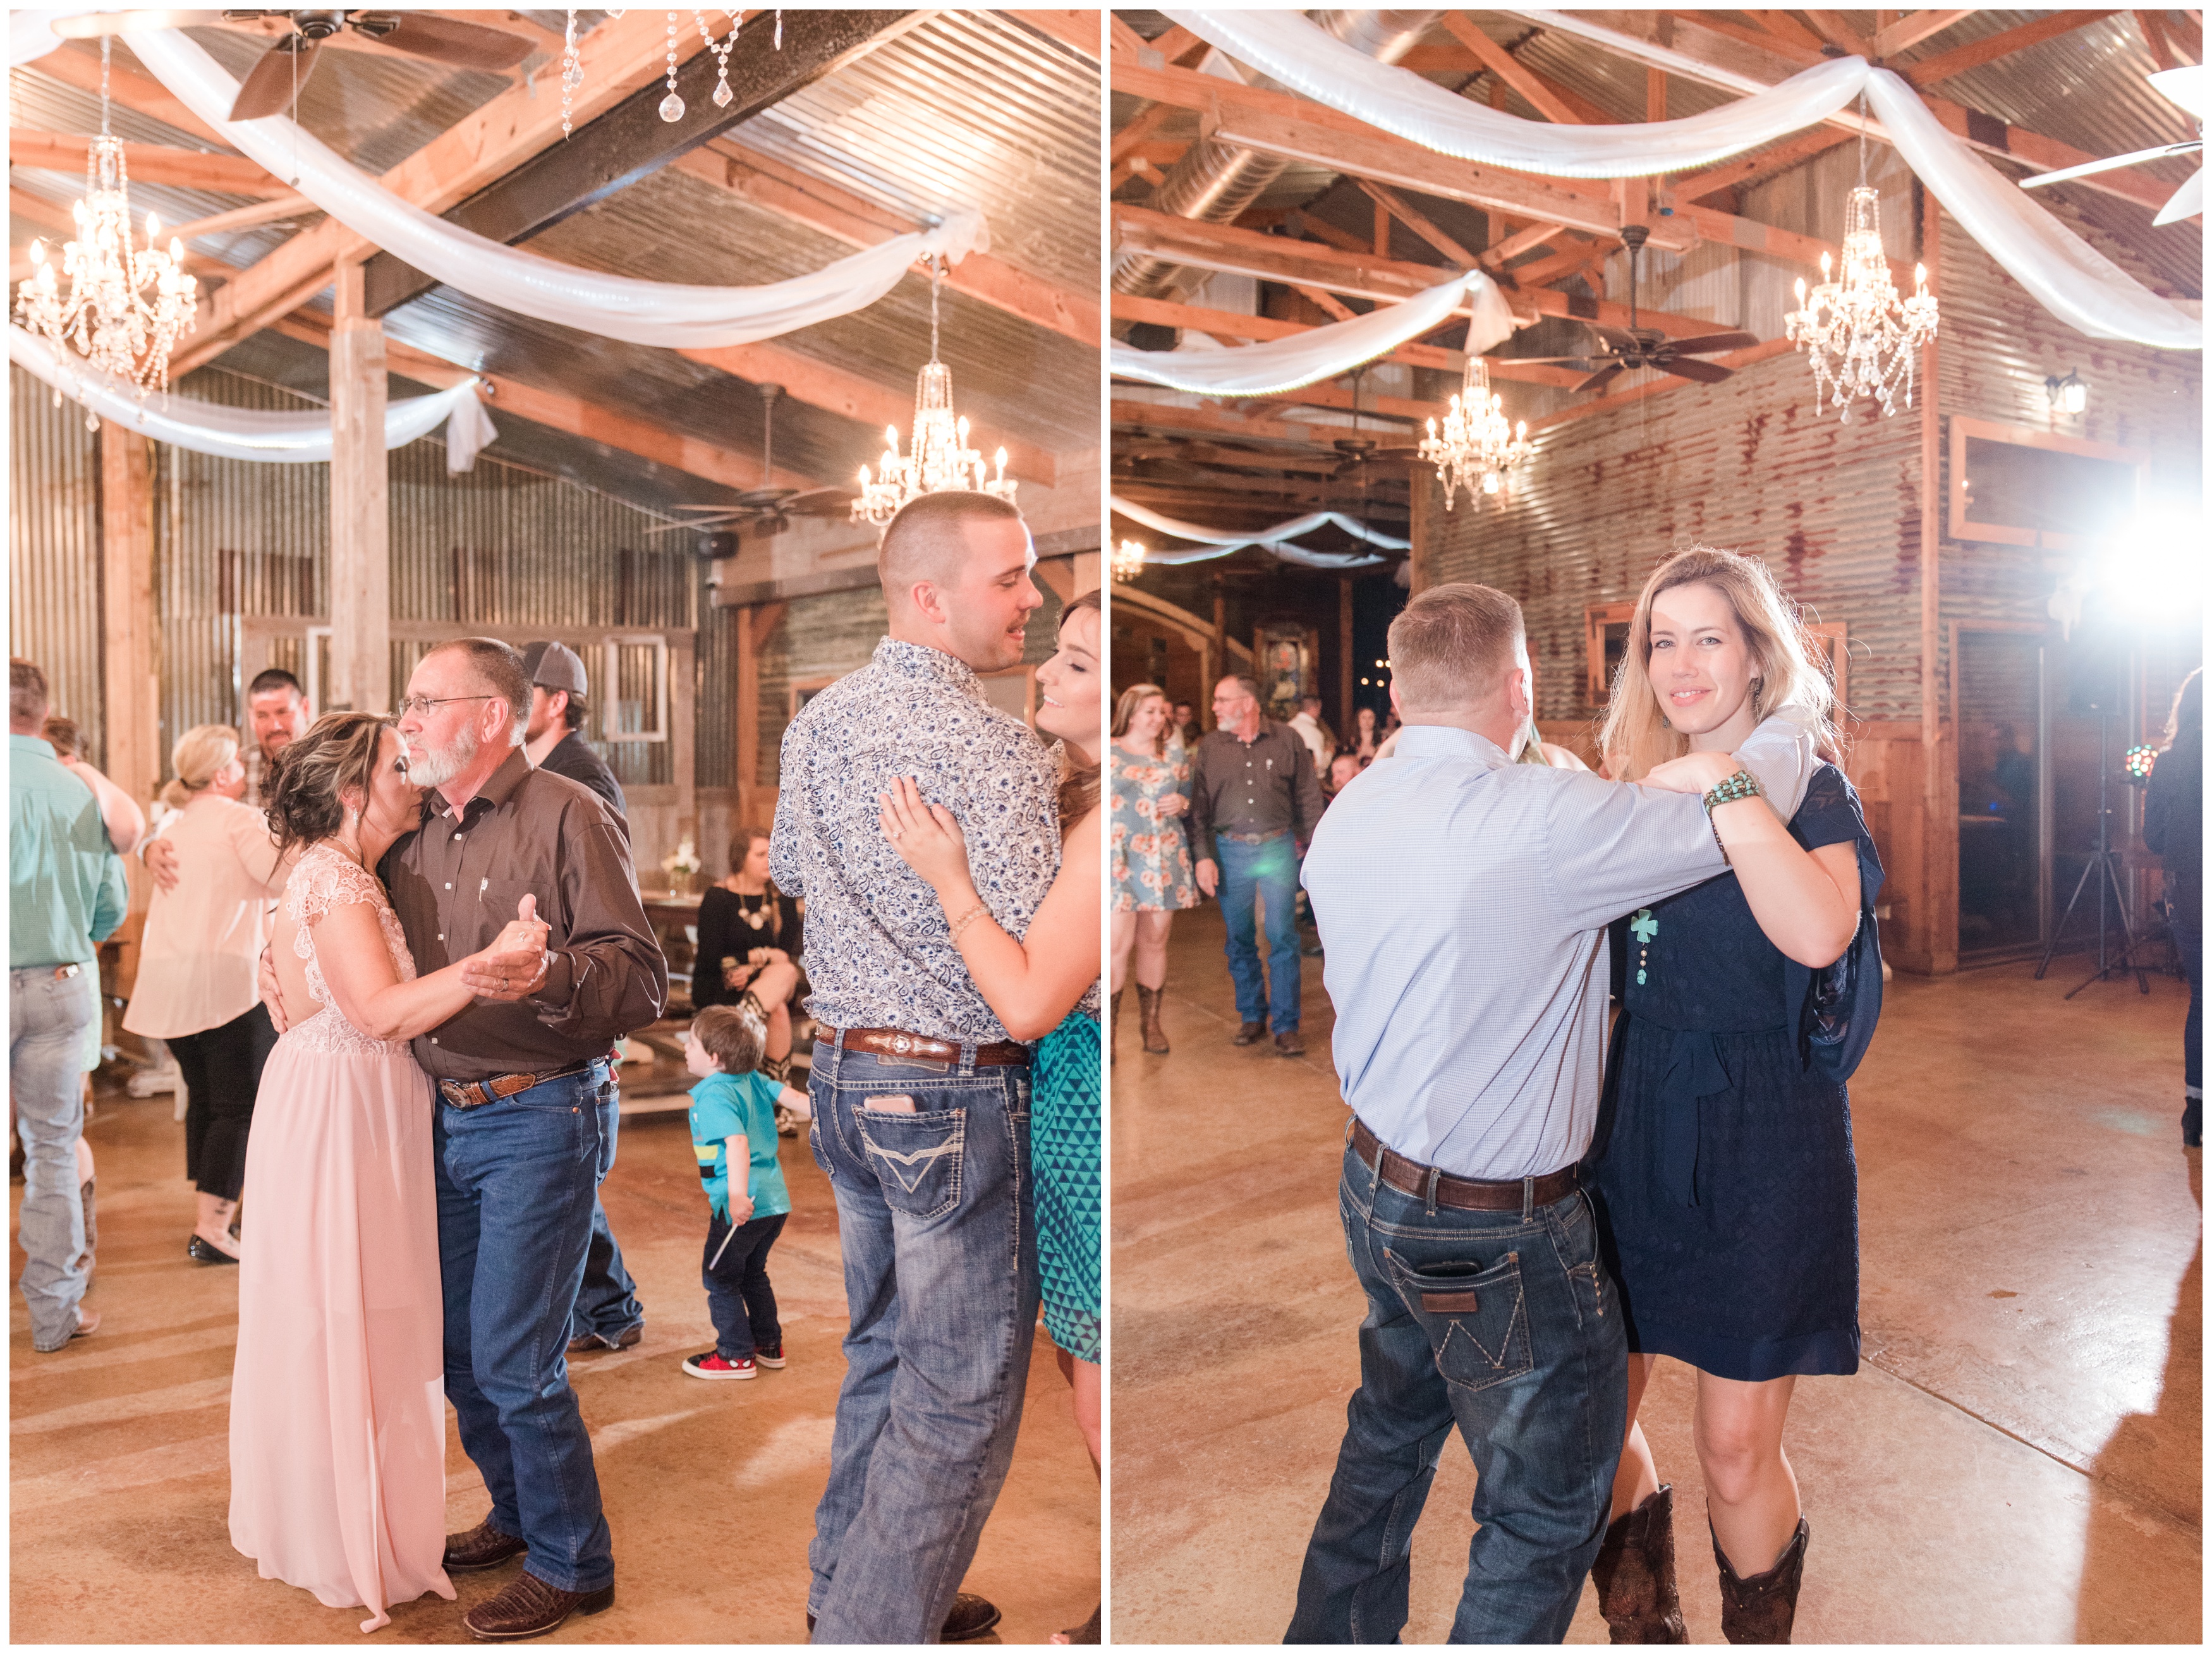 The Barn at Four Pines Wedding in Crosby TX - Kevin and Sammi_0382